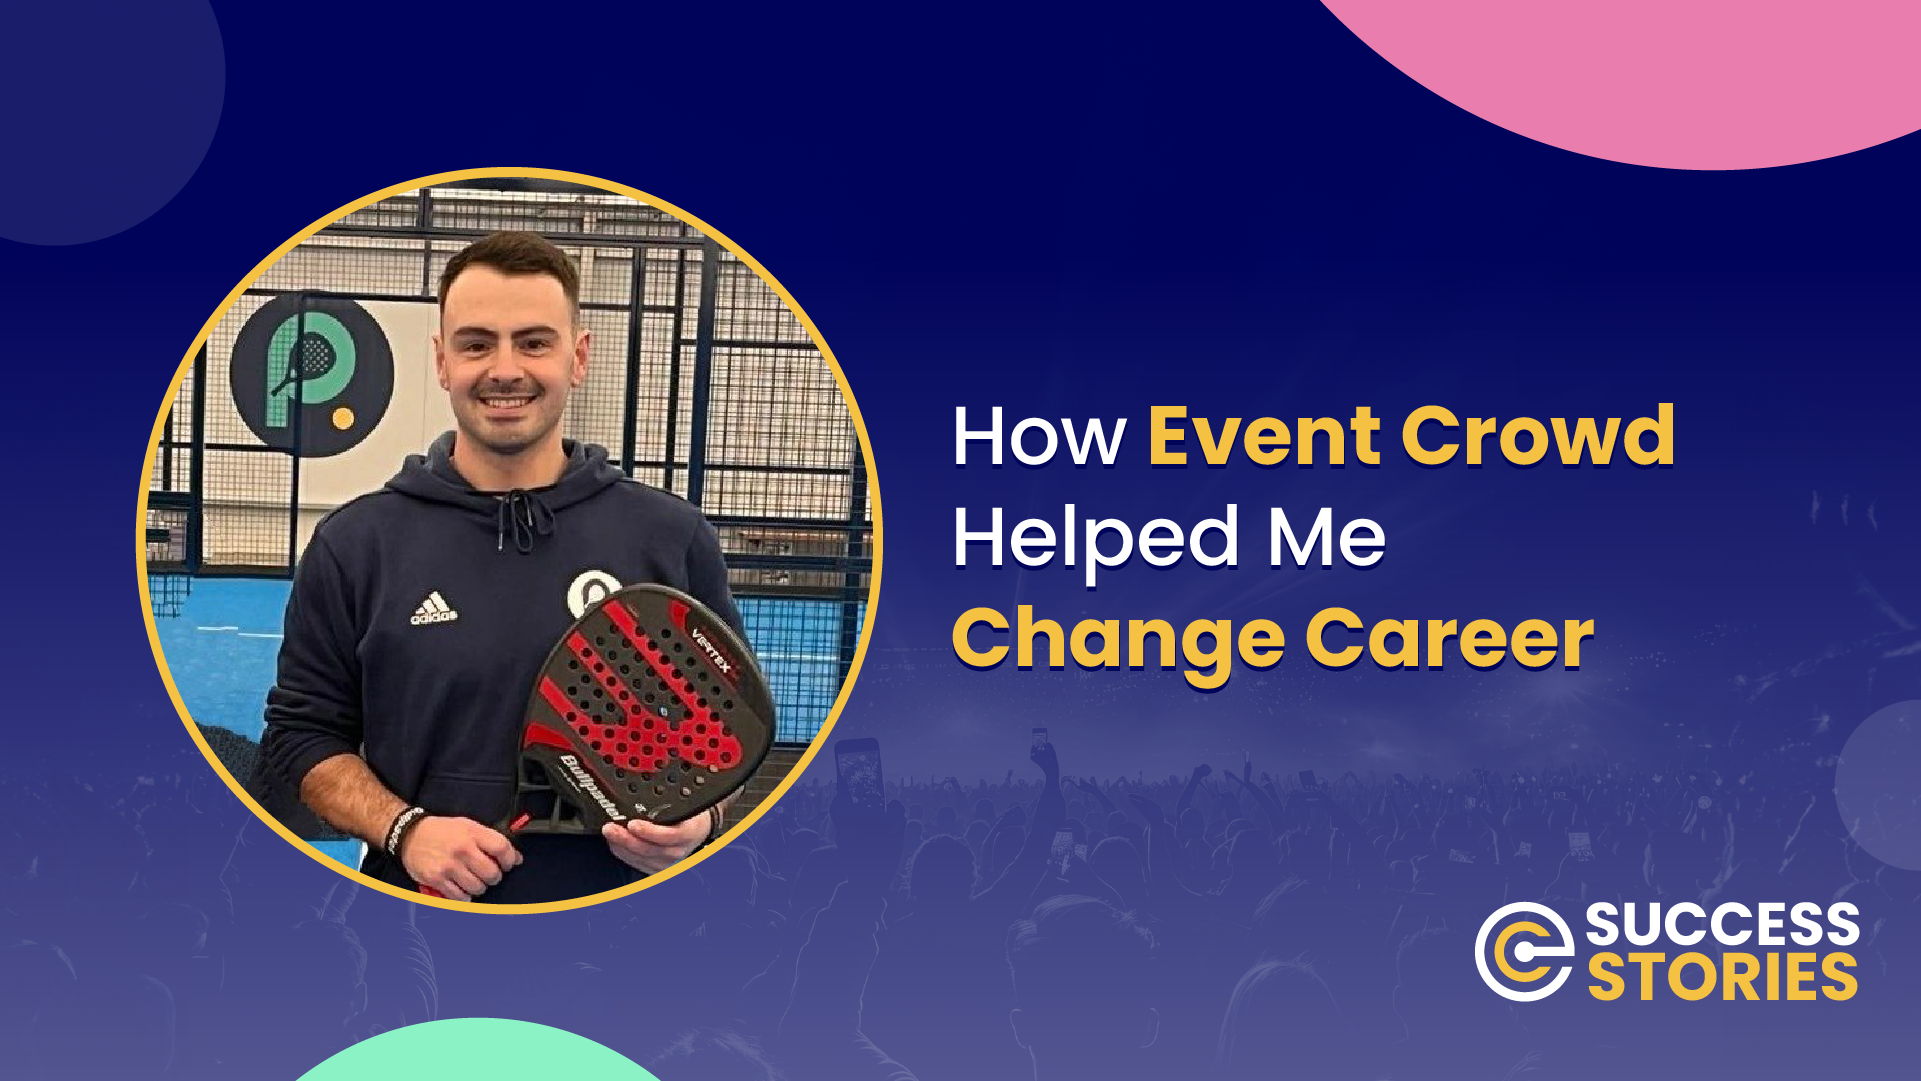 How Event Crowd Helped Me Change Career